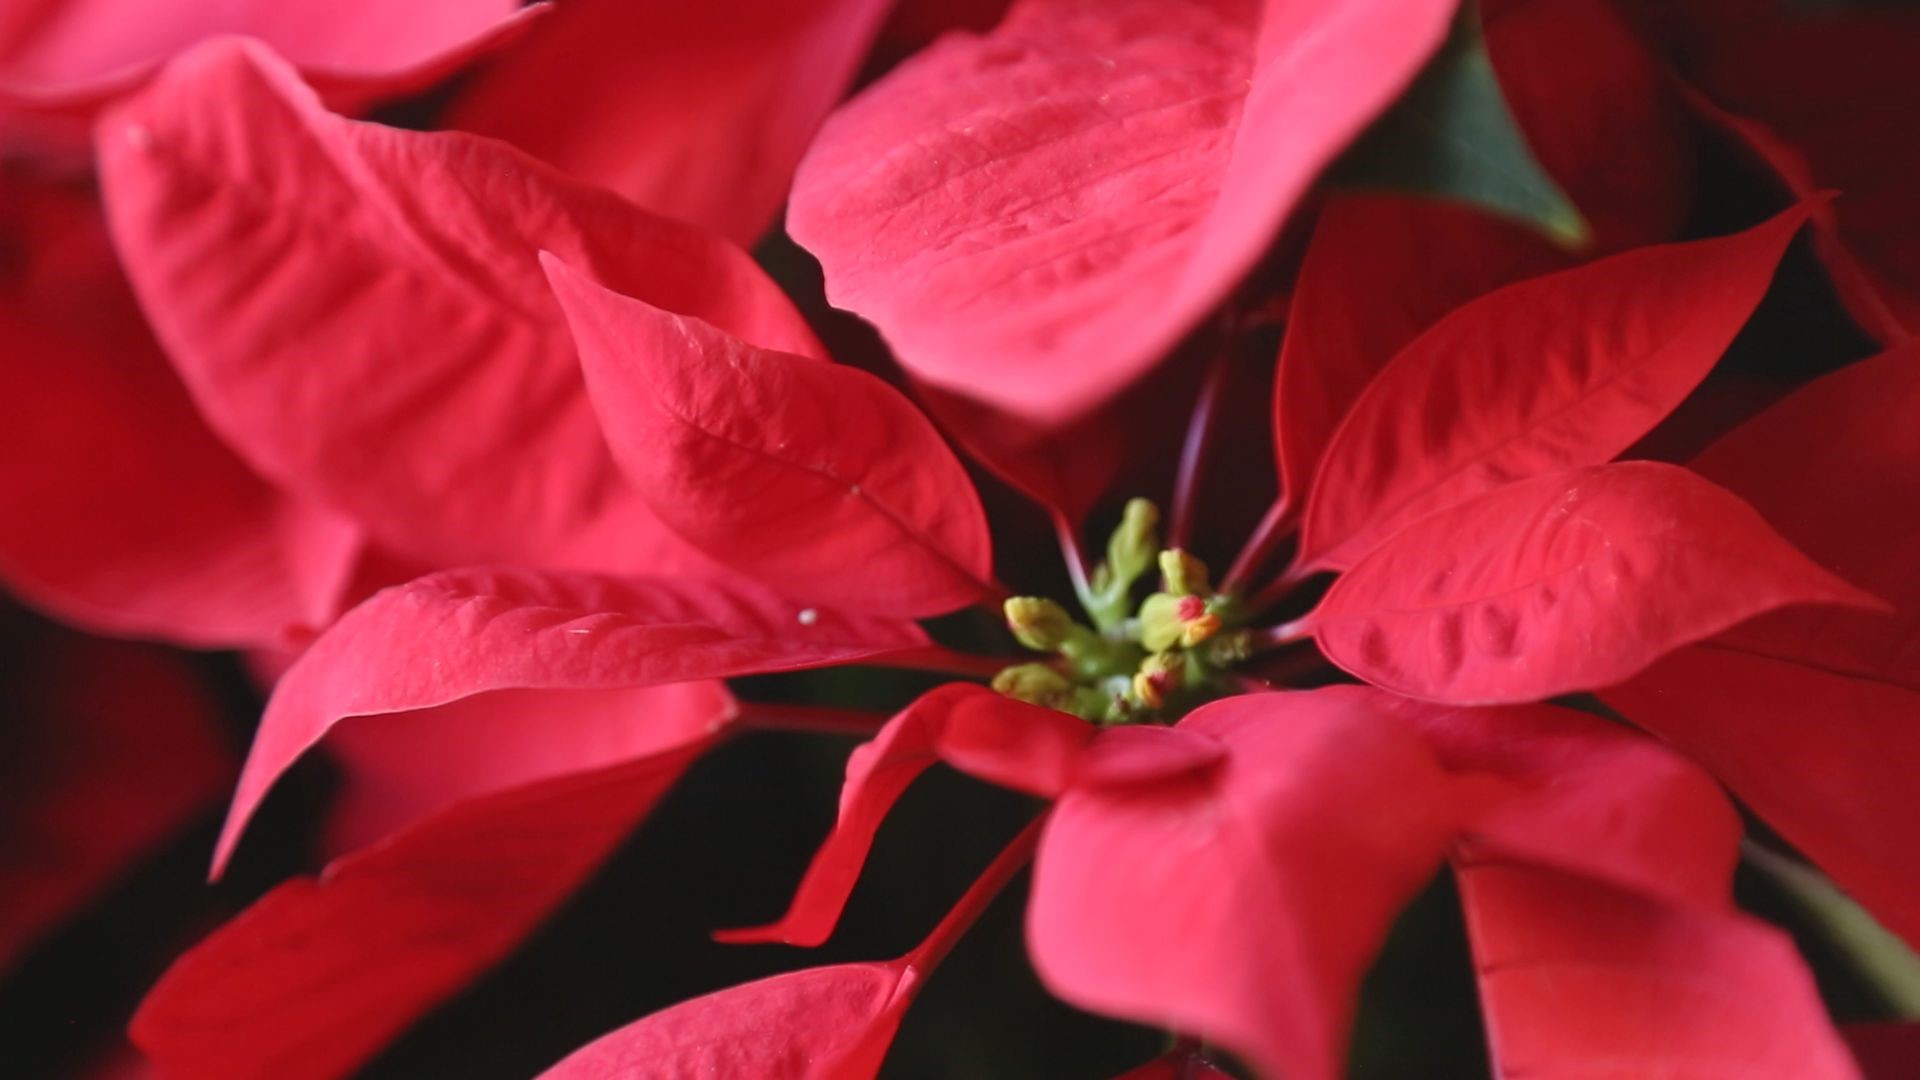 9NEWS Garden Expert Rob Proctor shares tips on caring for holiday poinsettias.